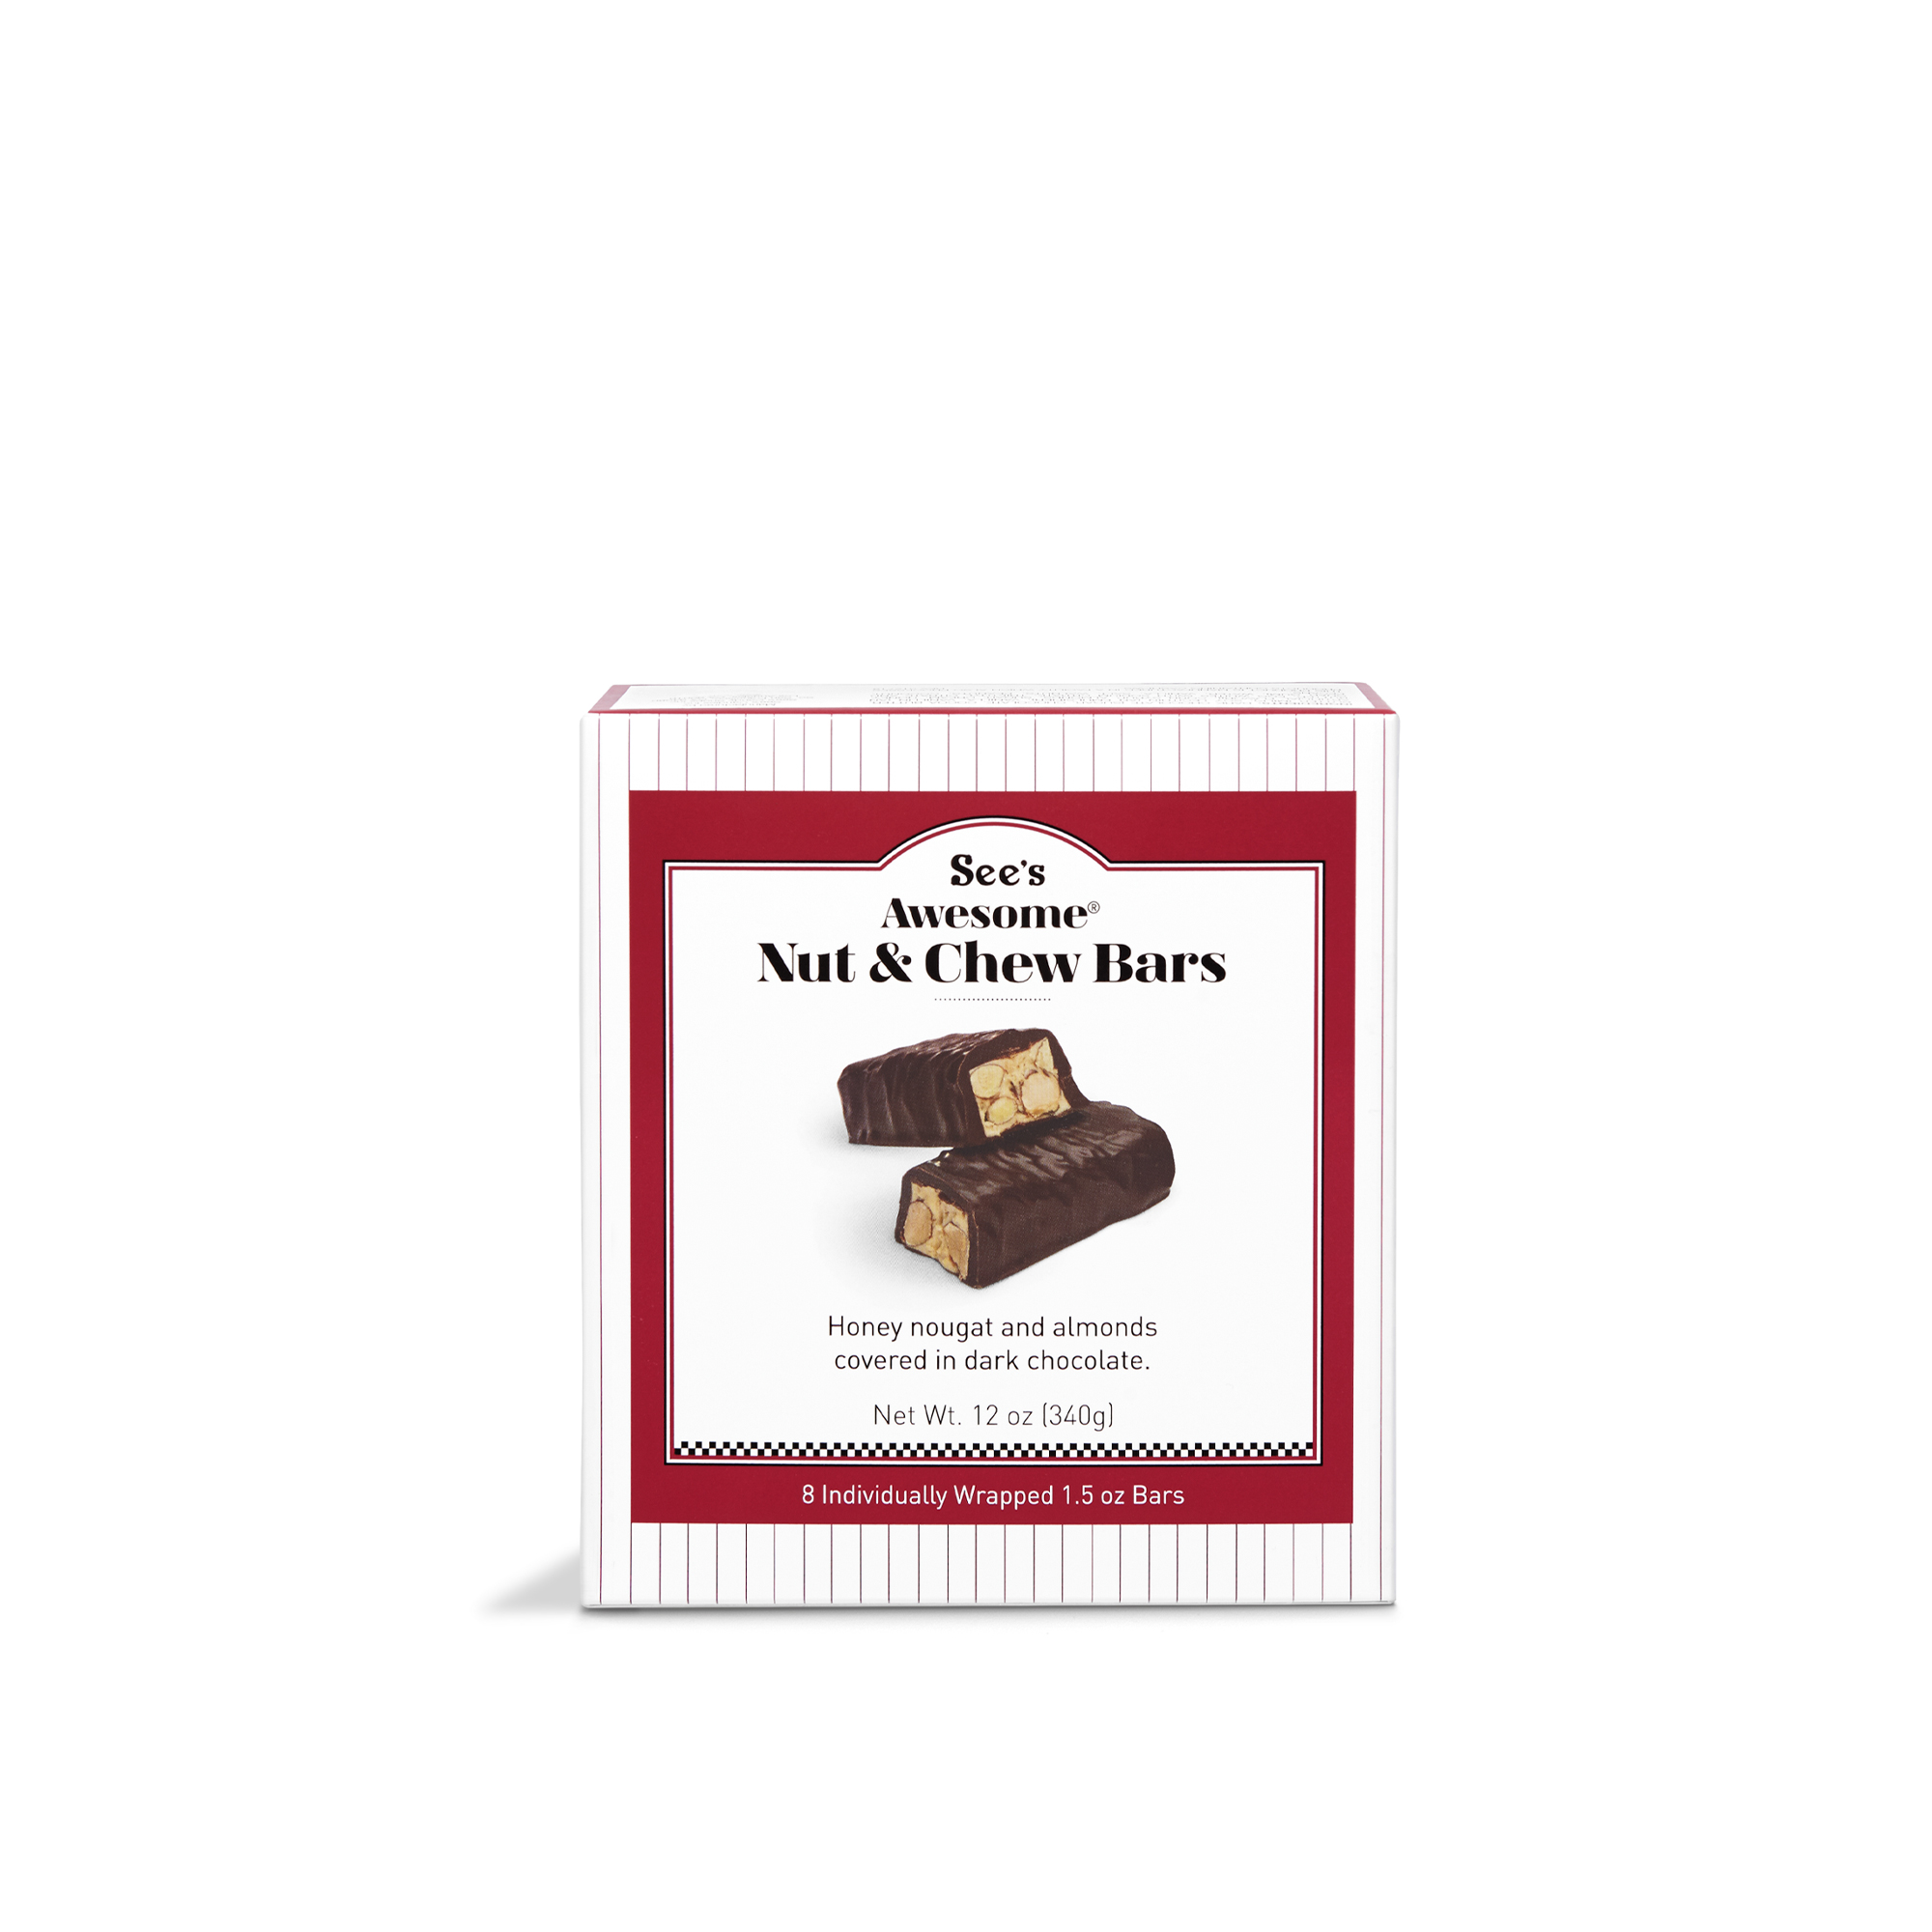 12 oz See's Awesome® Nut & Chew Bars